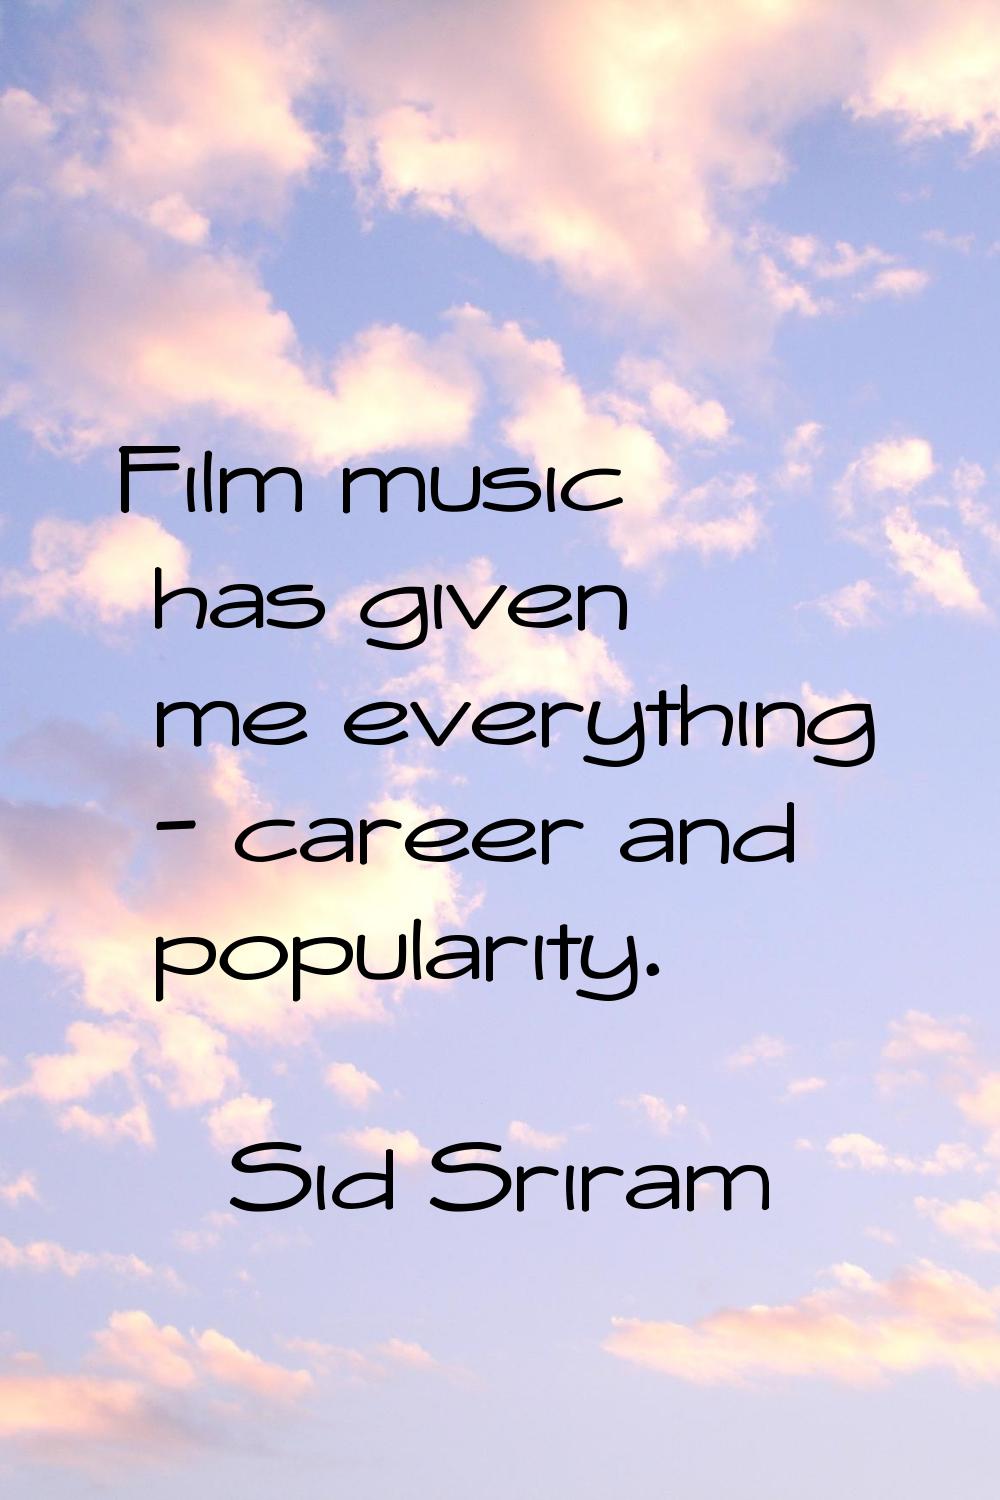 Film music has given me everything - career and popularity.